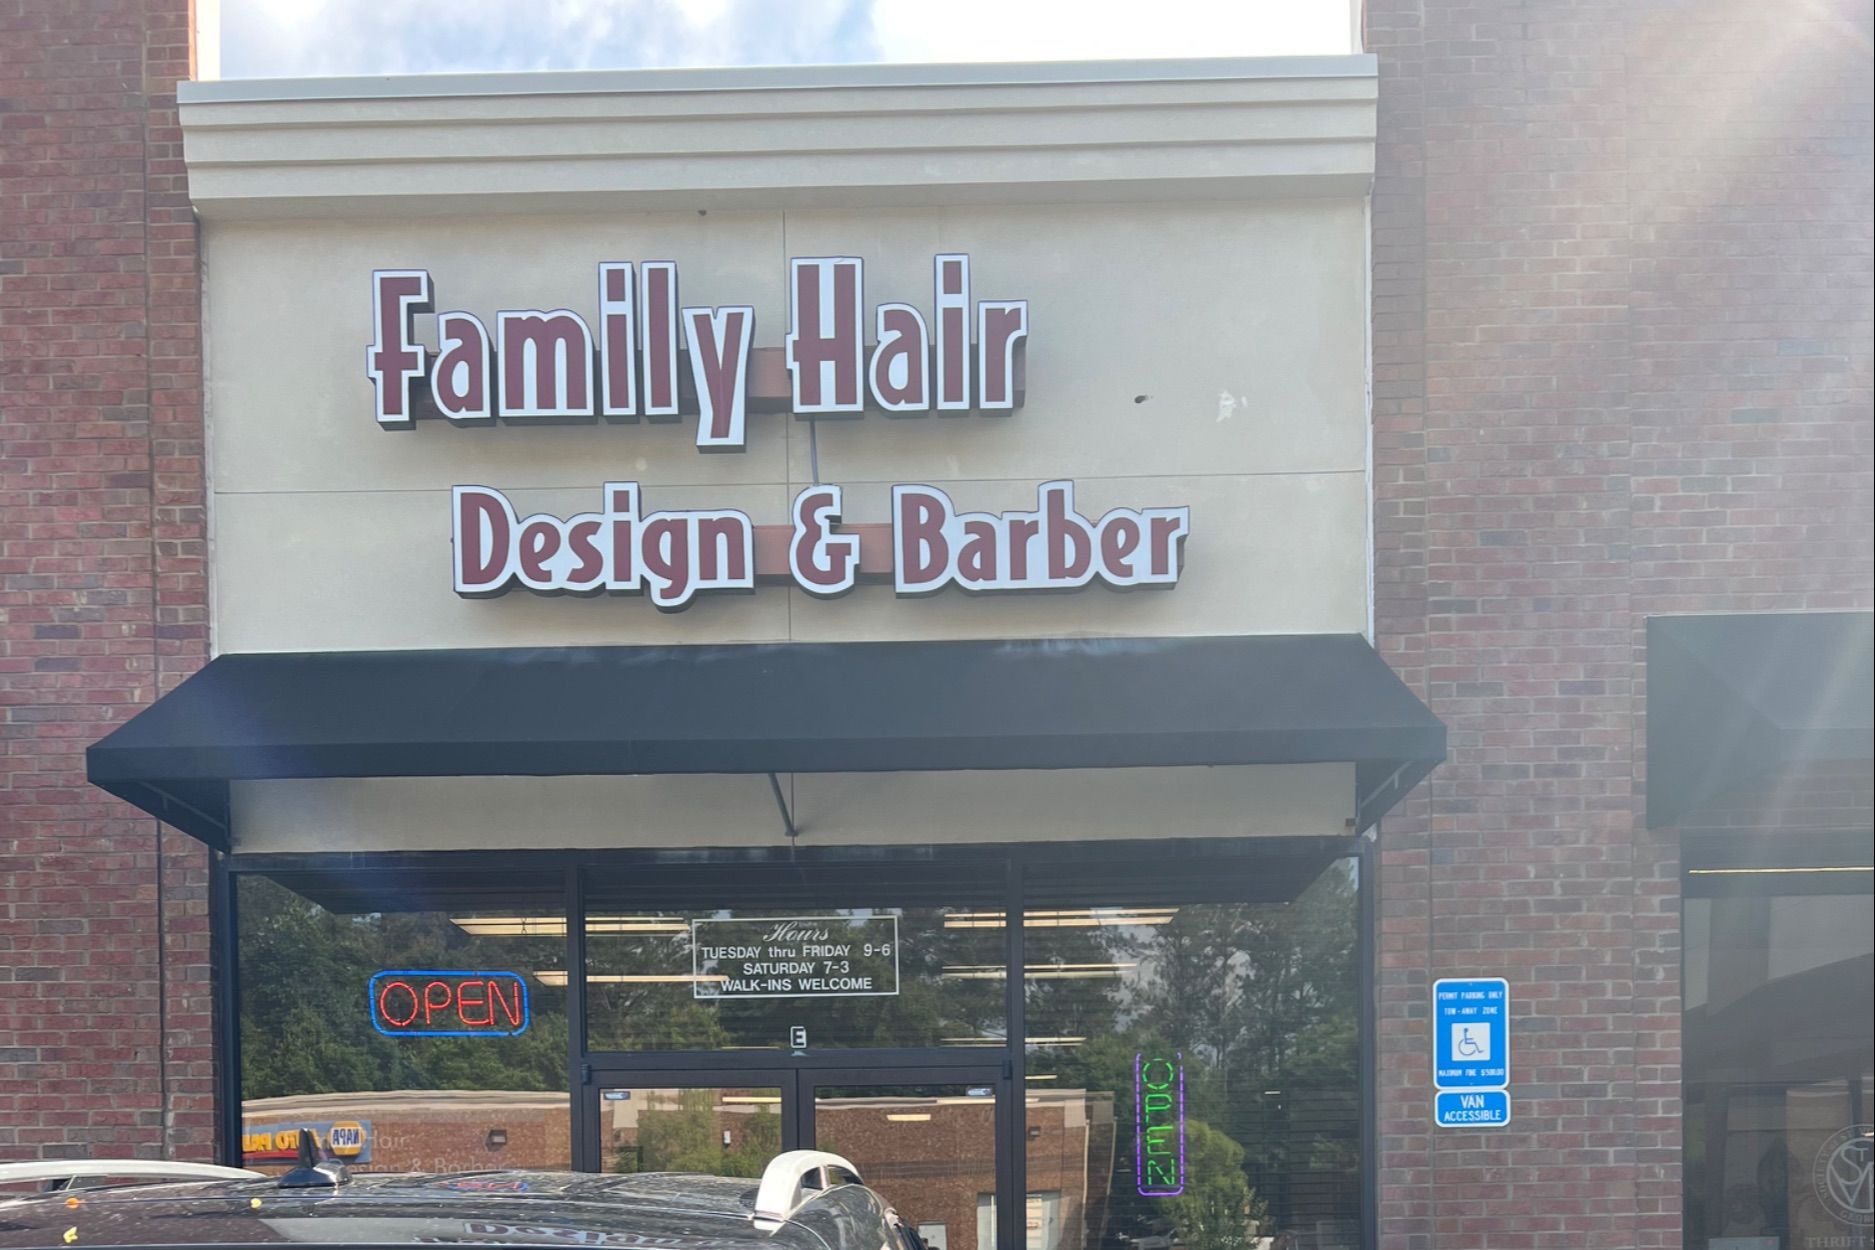 Hair Salons Near You in Buford, GA - Best Hair Stylists & Hairdressers in  Buford